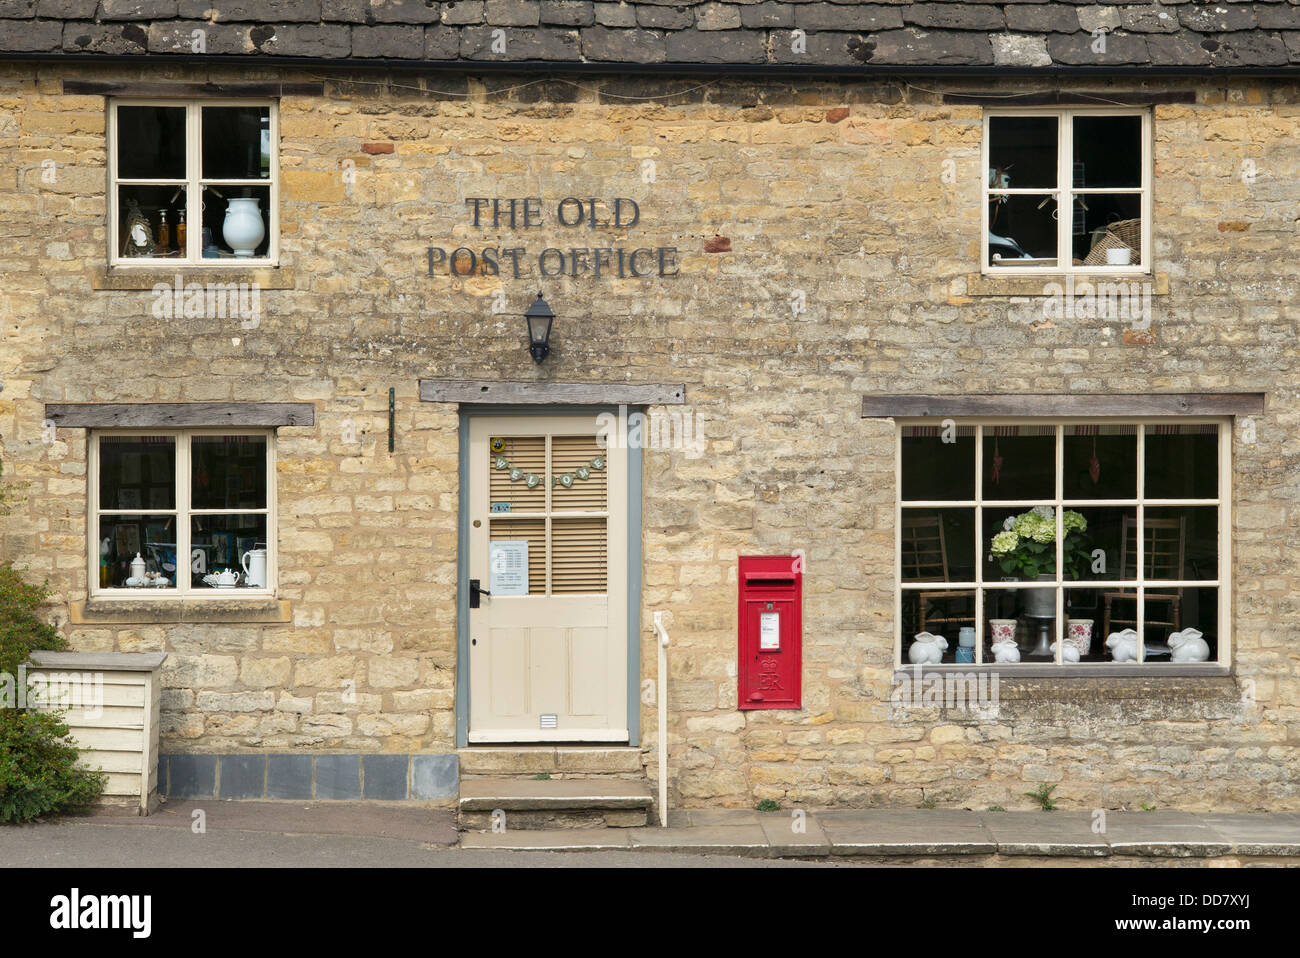 Der Old Post Office Shop, Guiting Power, Gloucestershire, England Stockfoto